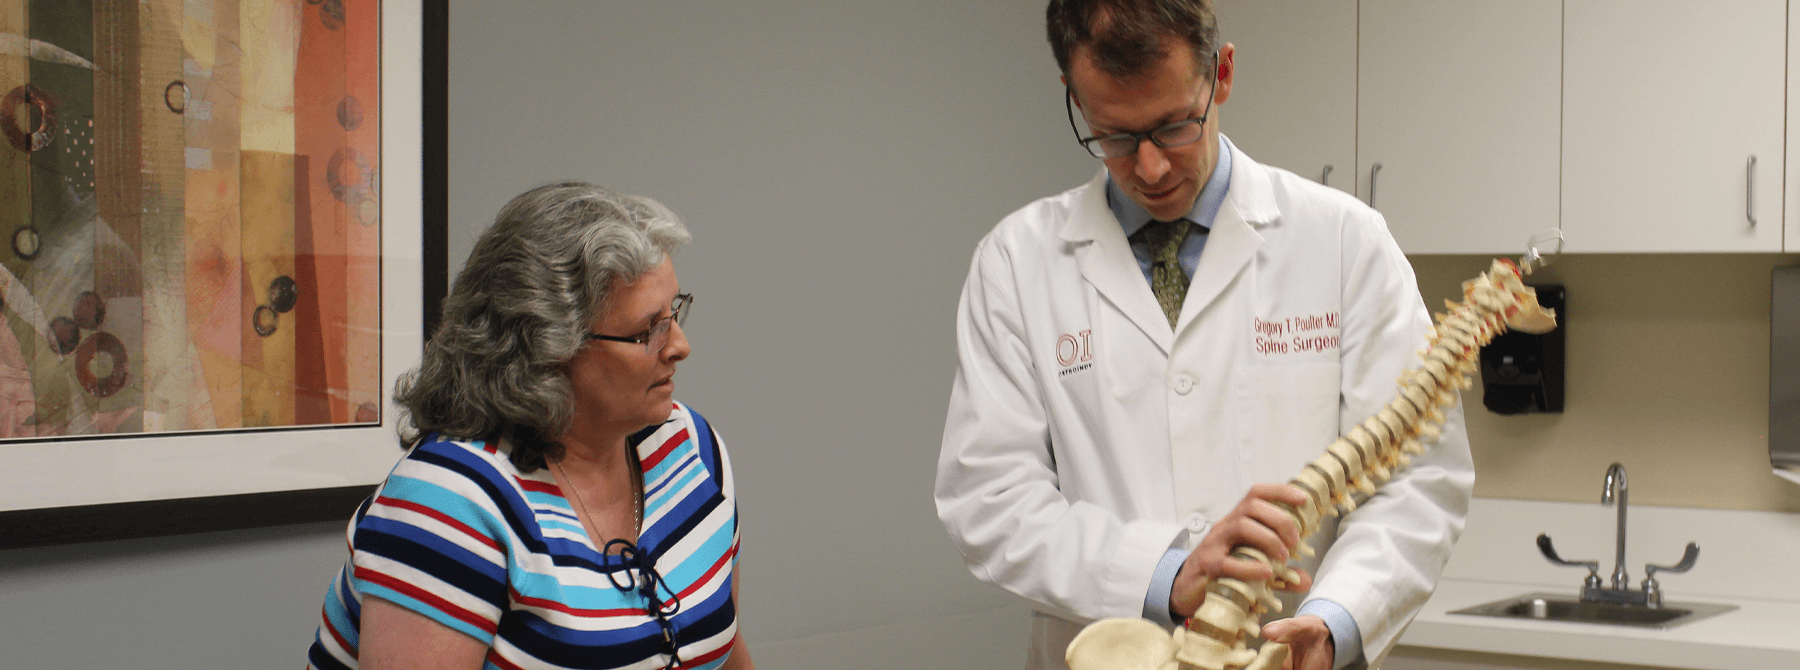 Dr. Poulter consulting patient about spine.